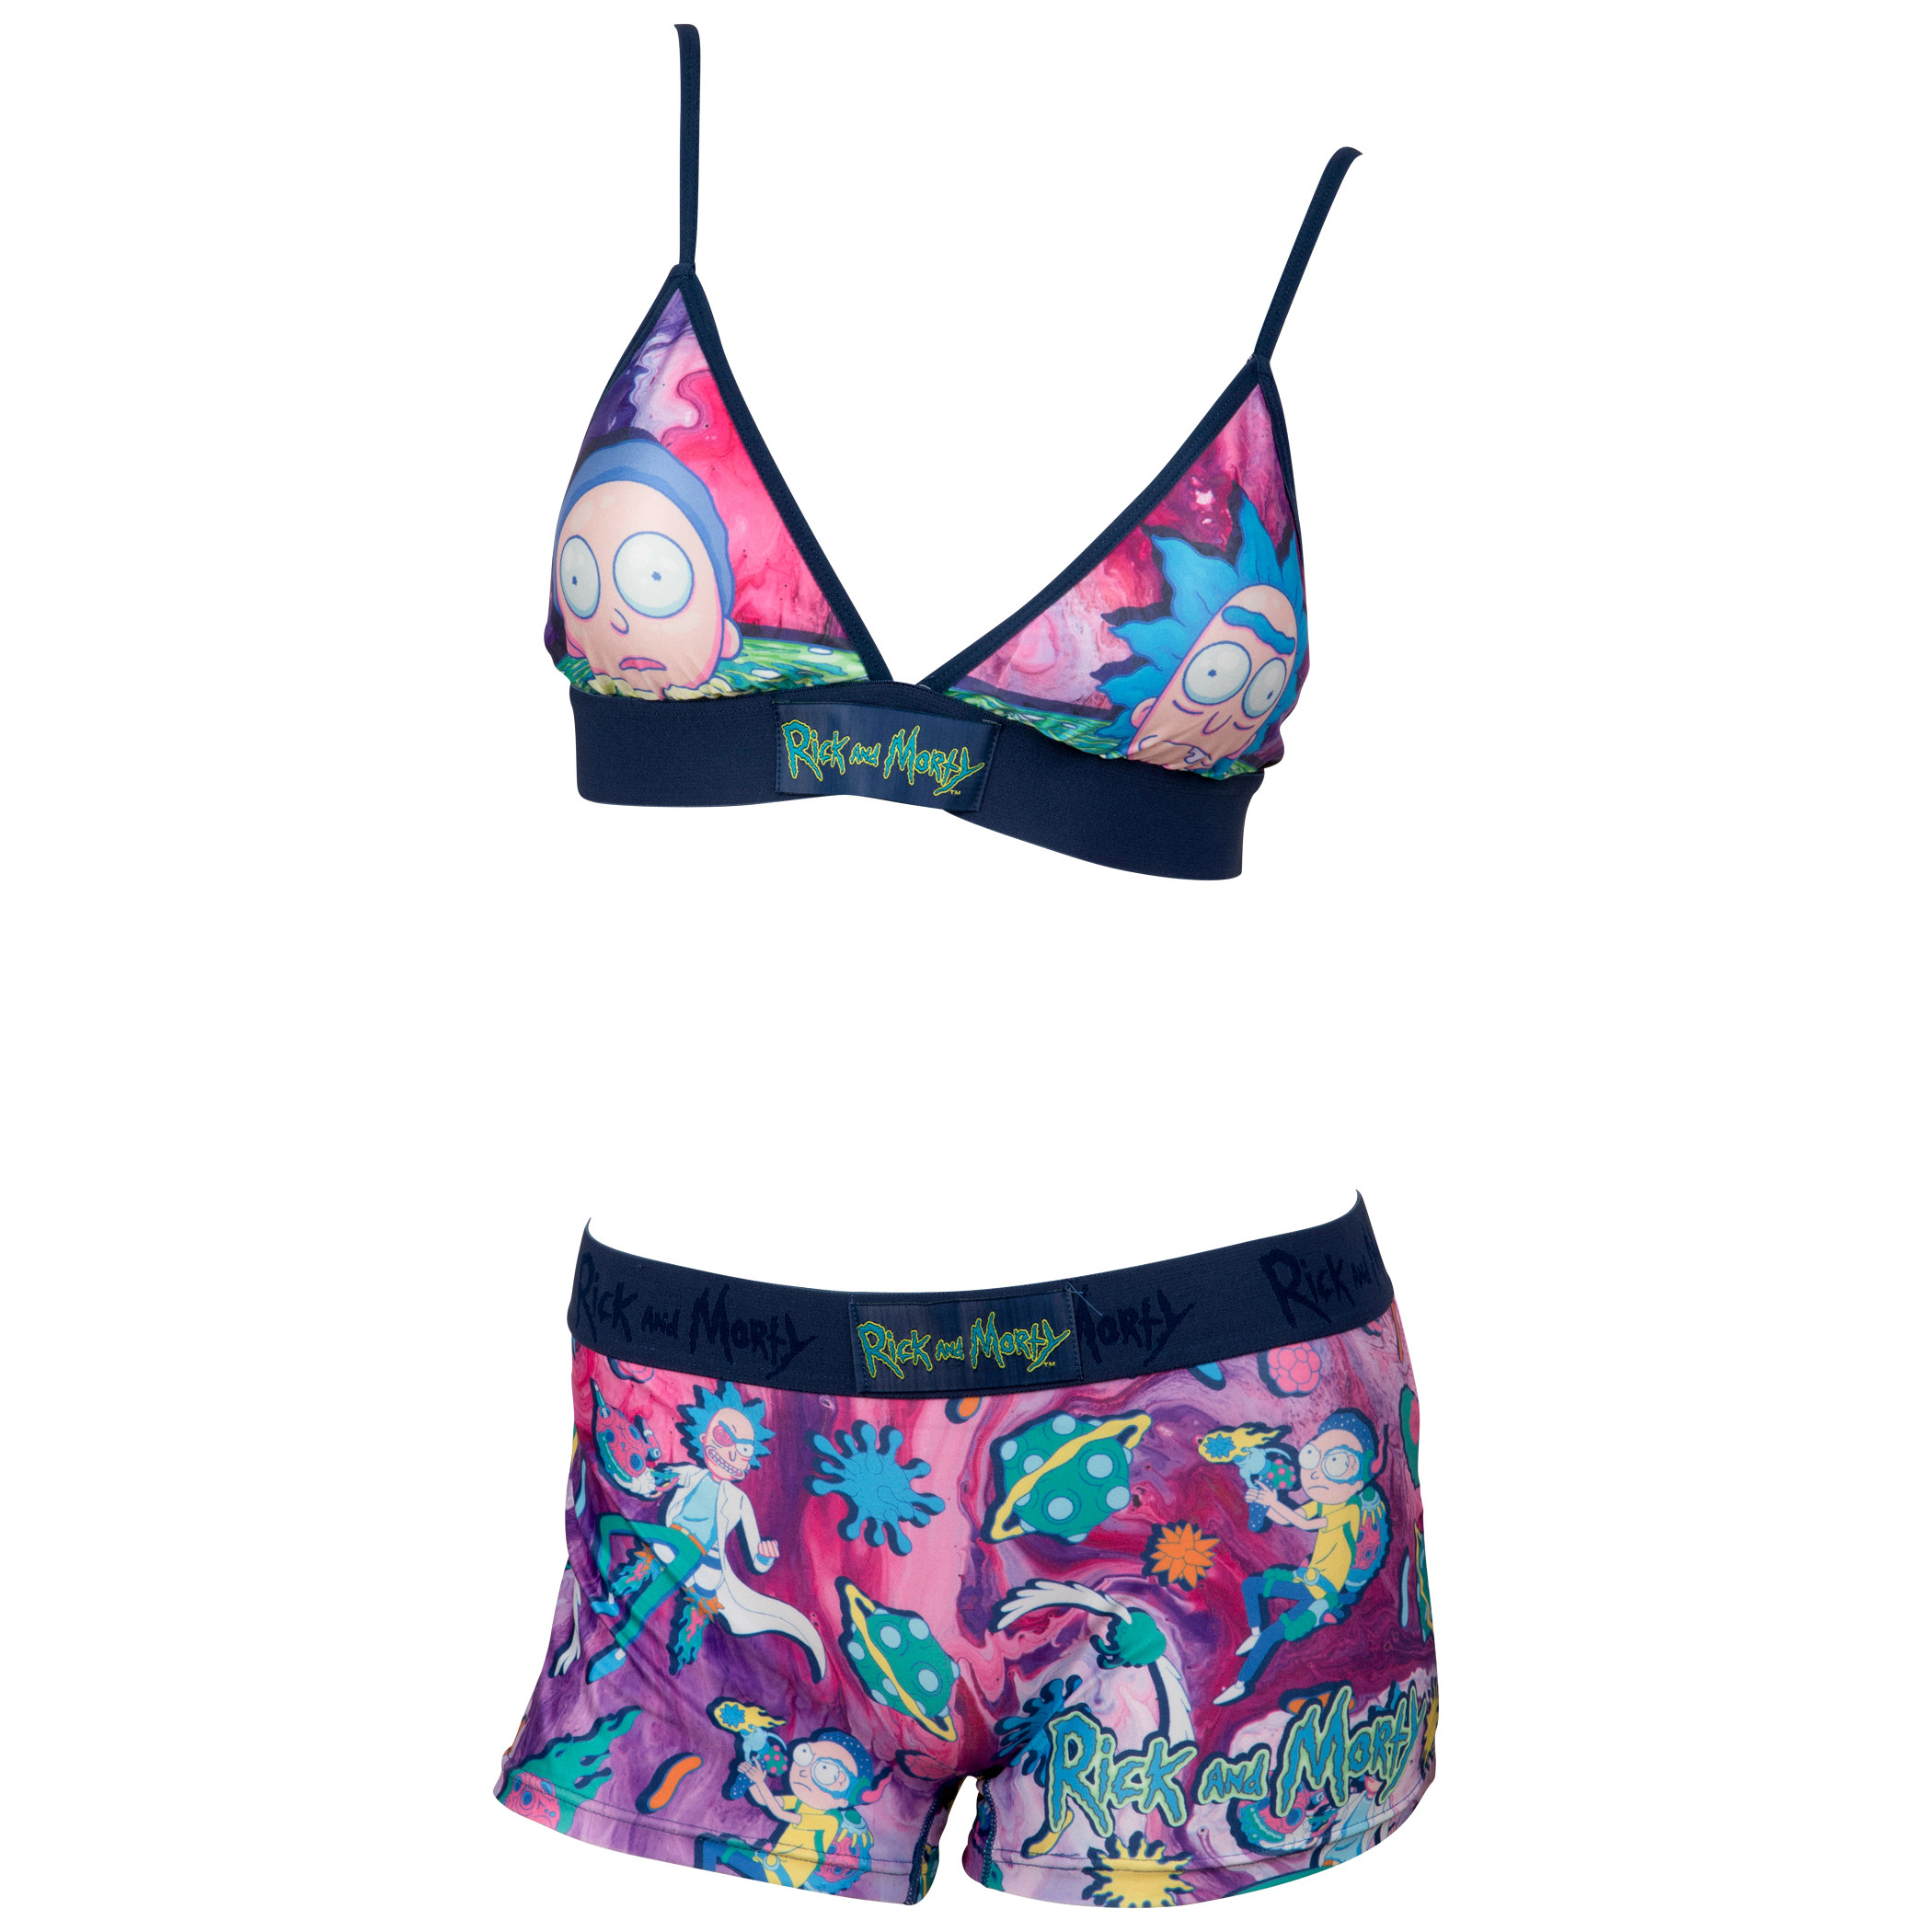 Rick And Morty Hyper Colors Triangle Bra and Boy Short Panty Set